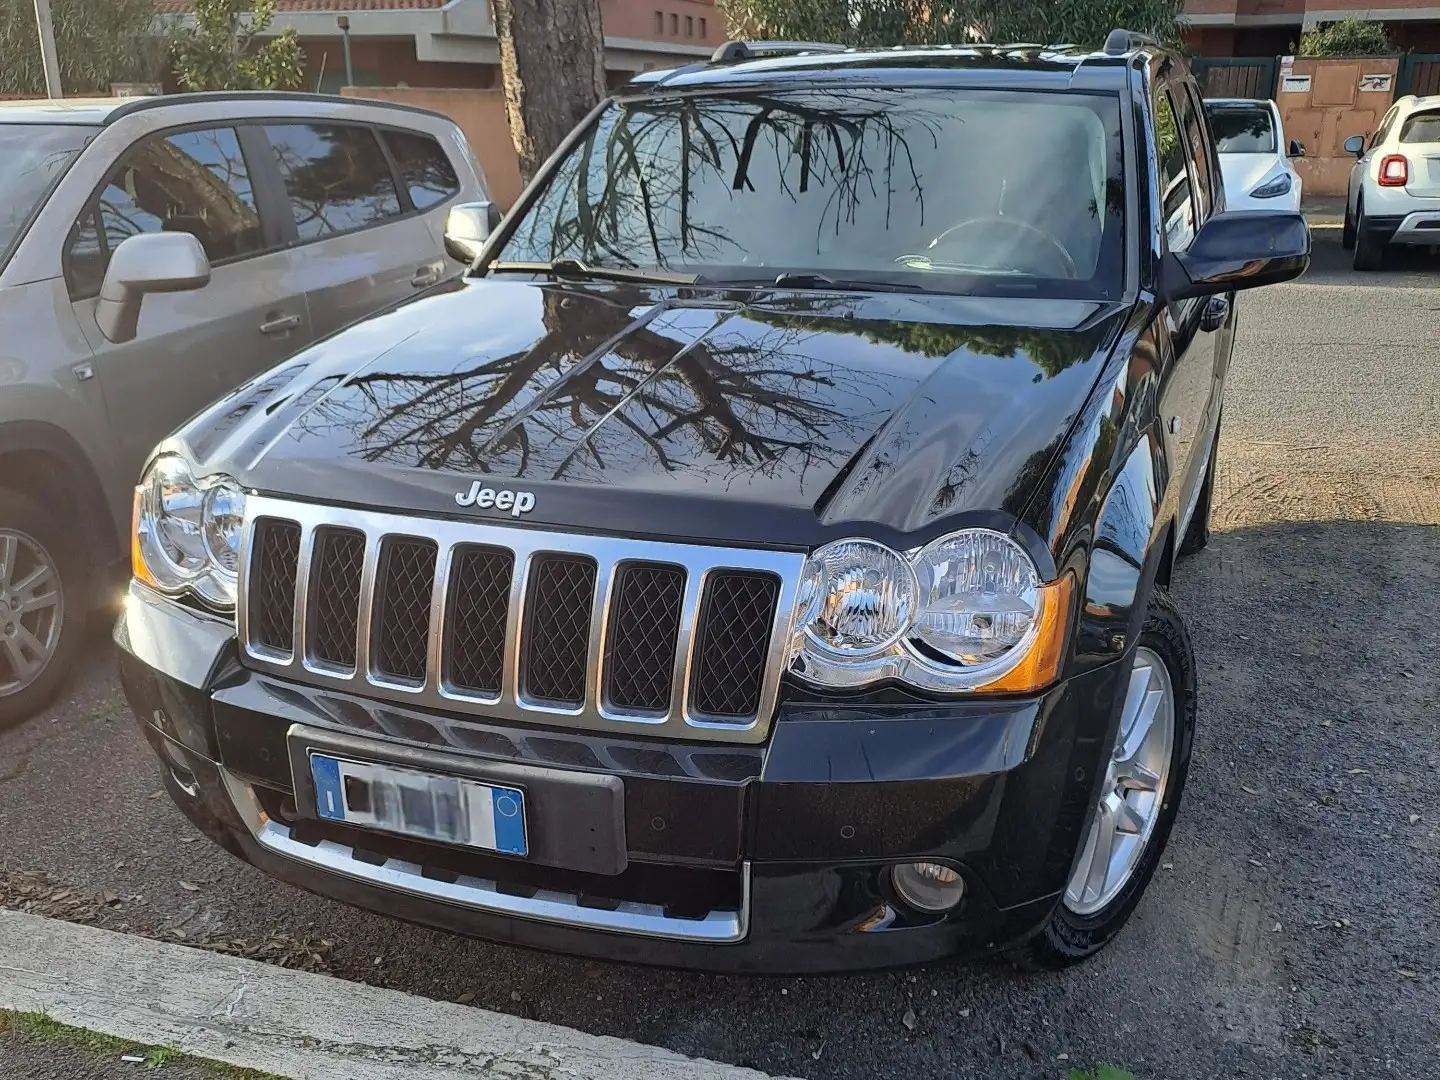 Jeep Grand Cherokee 3.0 V6 crd Overland auto my08 Fekete - 1